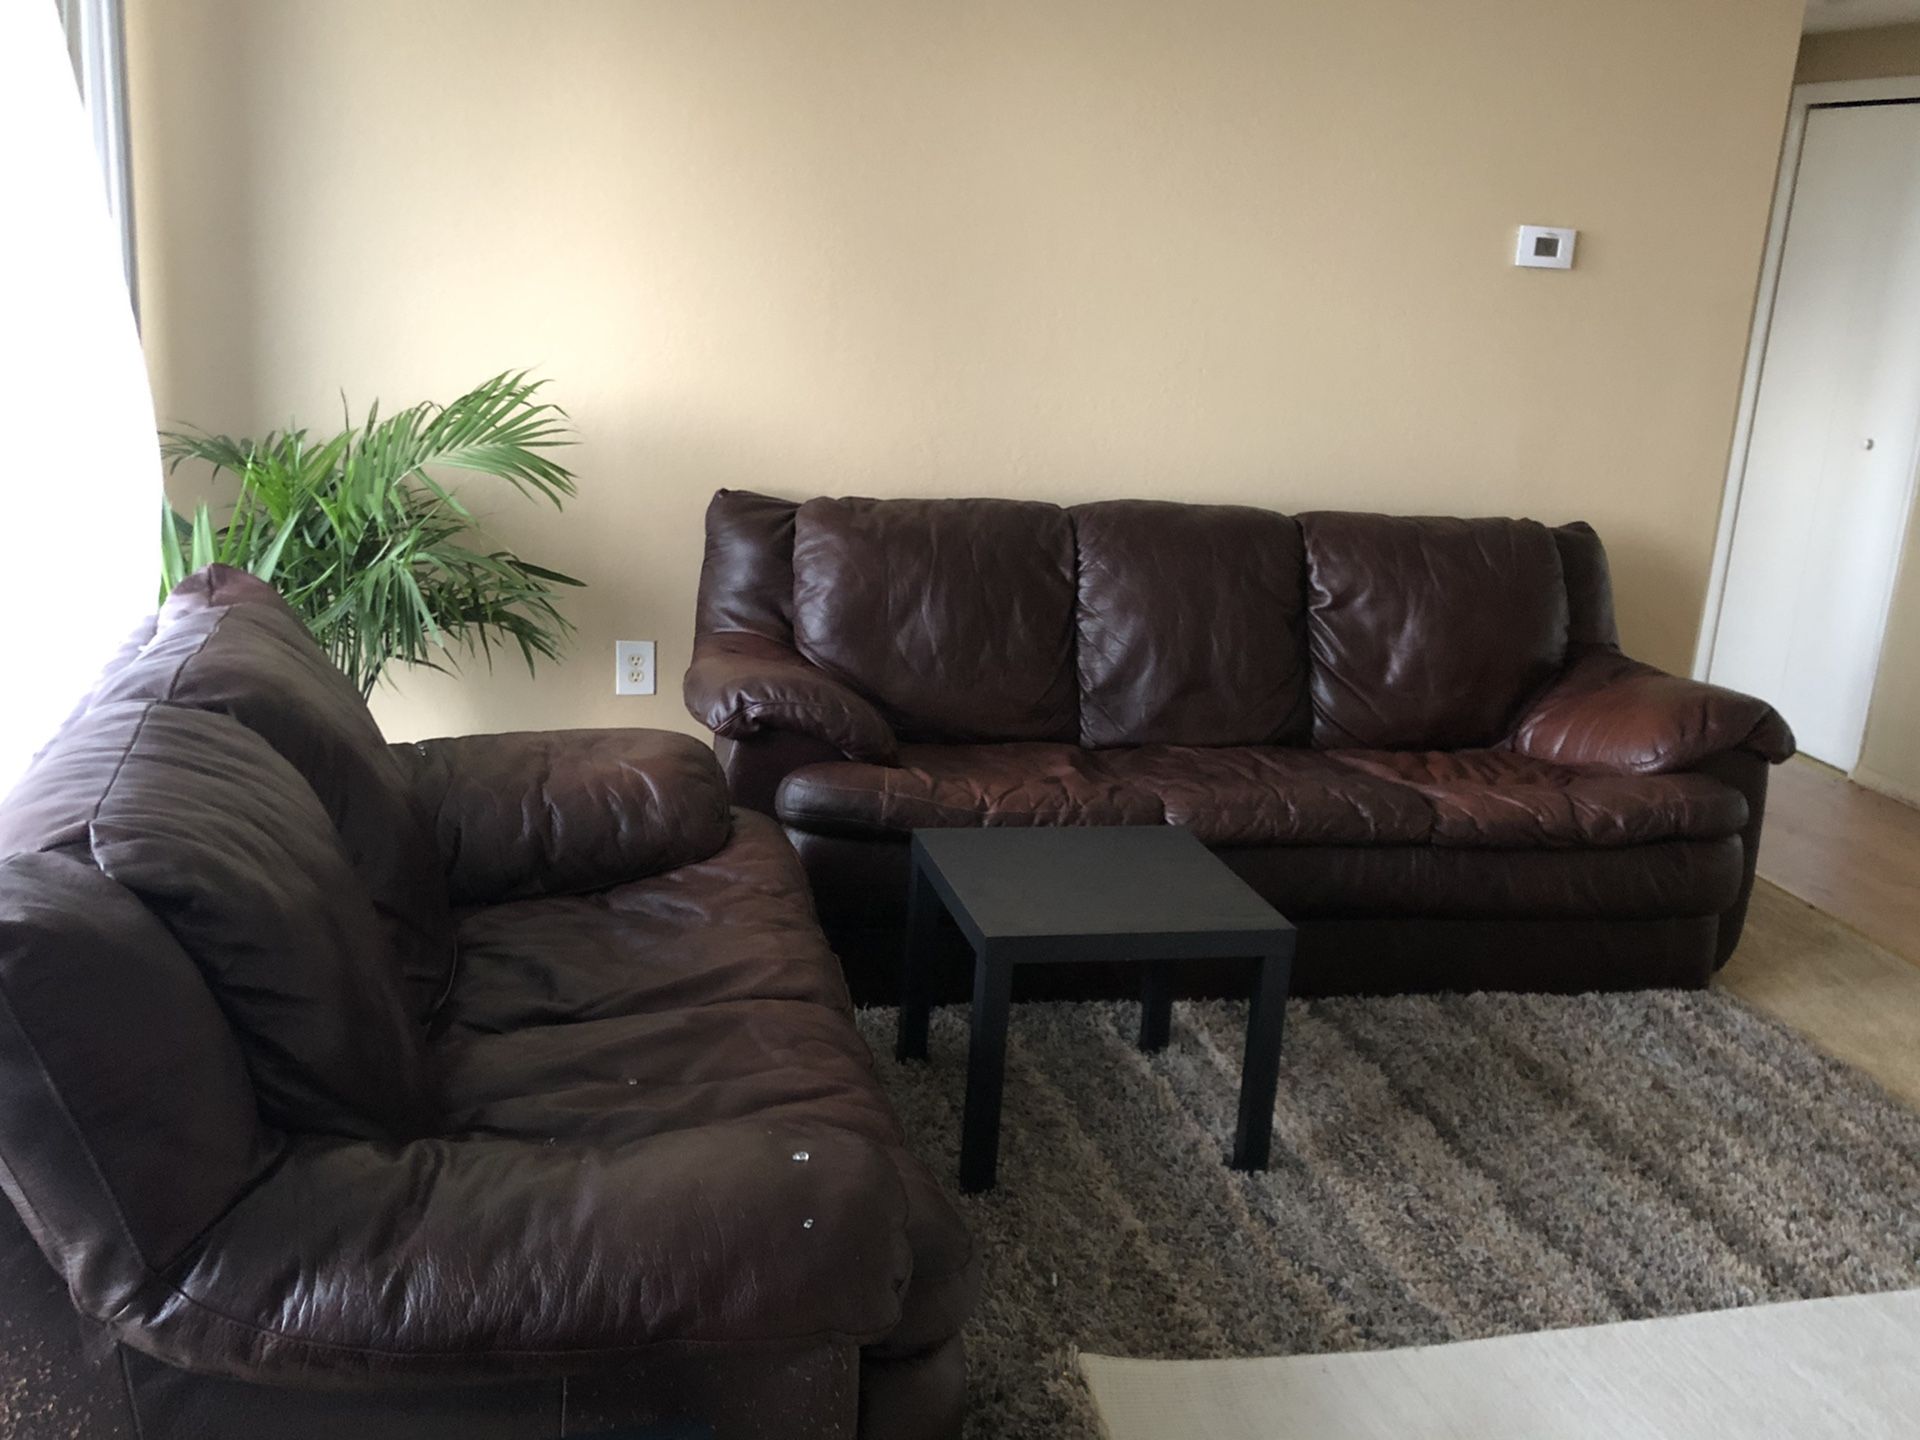 Two leather couch for 199 burgundy/ black so comfyyyyy